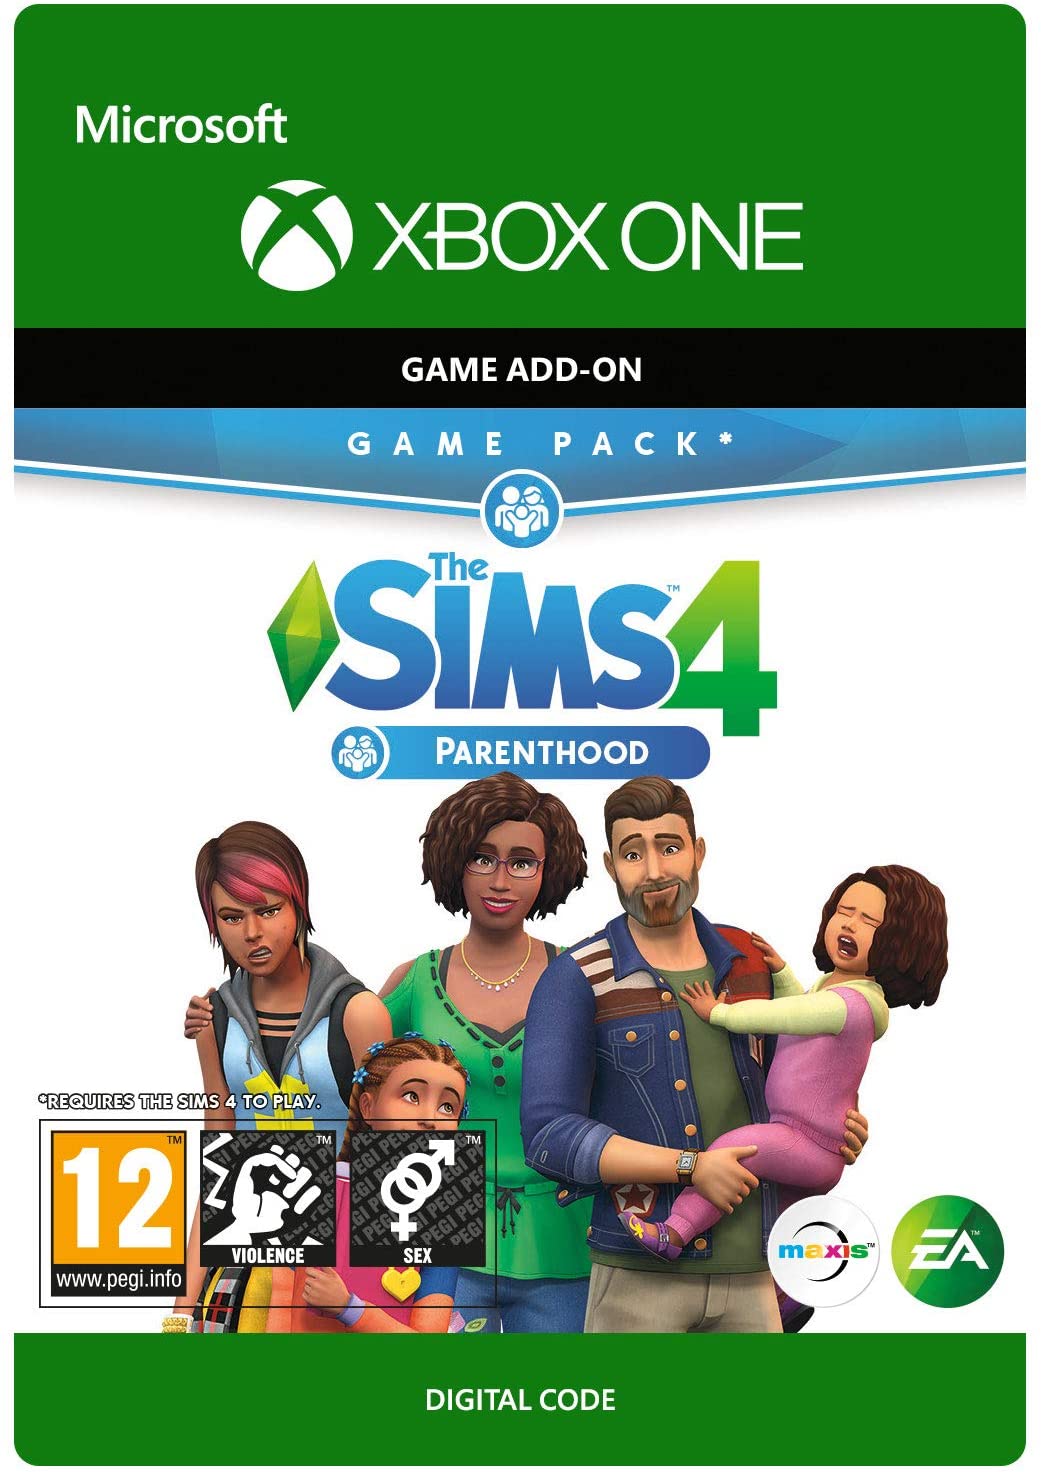 The Sims 4 Parenthood VPN ACTIVATED Key (Xbox One) - 